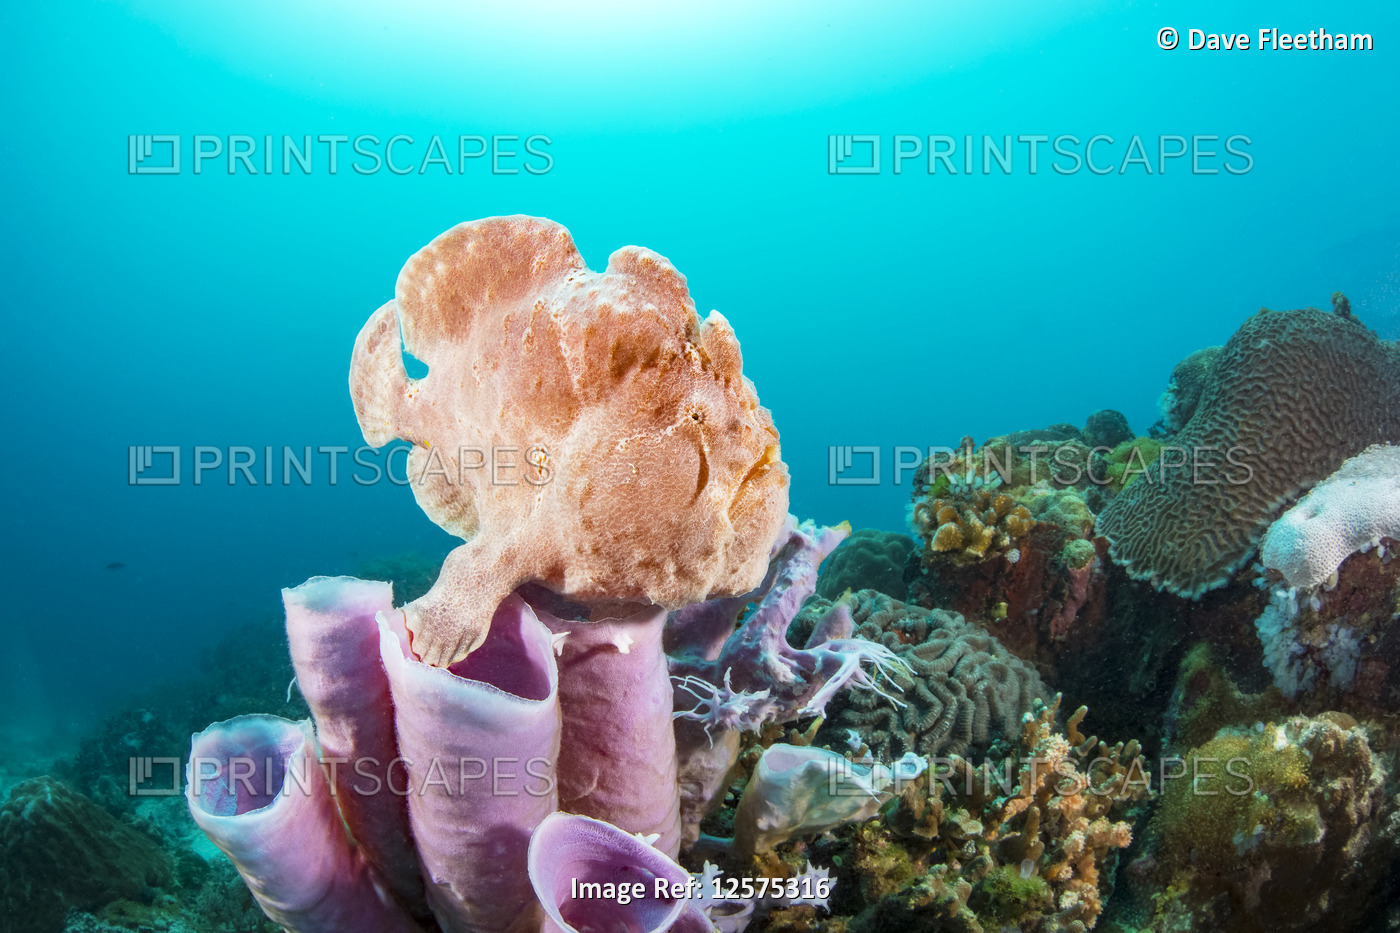 A Commerson's frogfish (Antennarius commersoni) perched on a tube sponge; ...